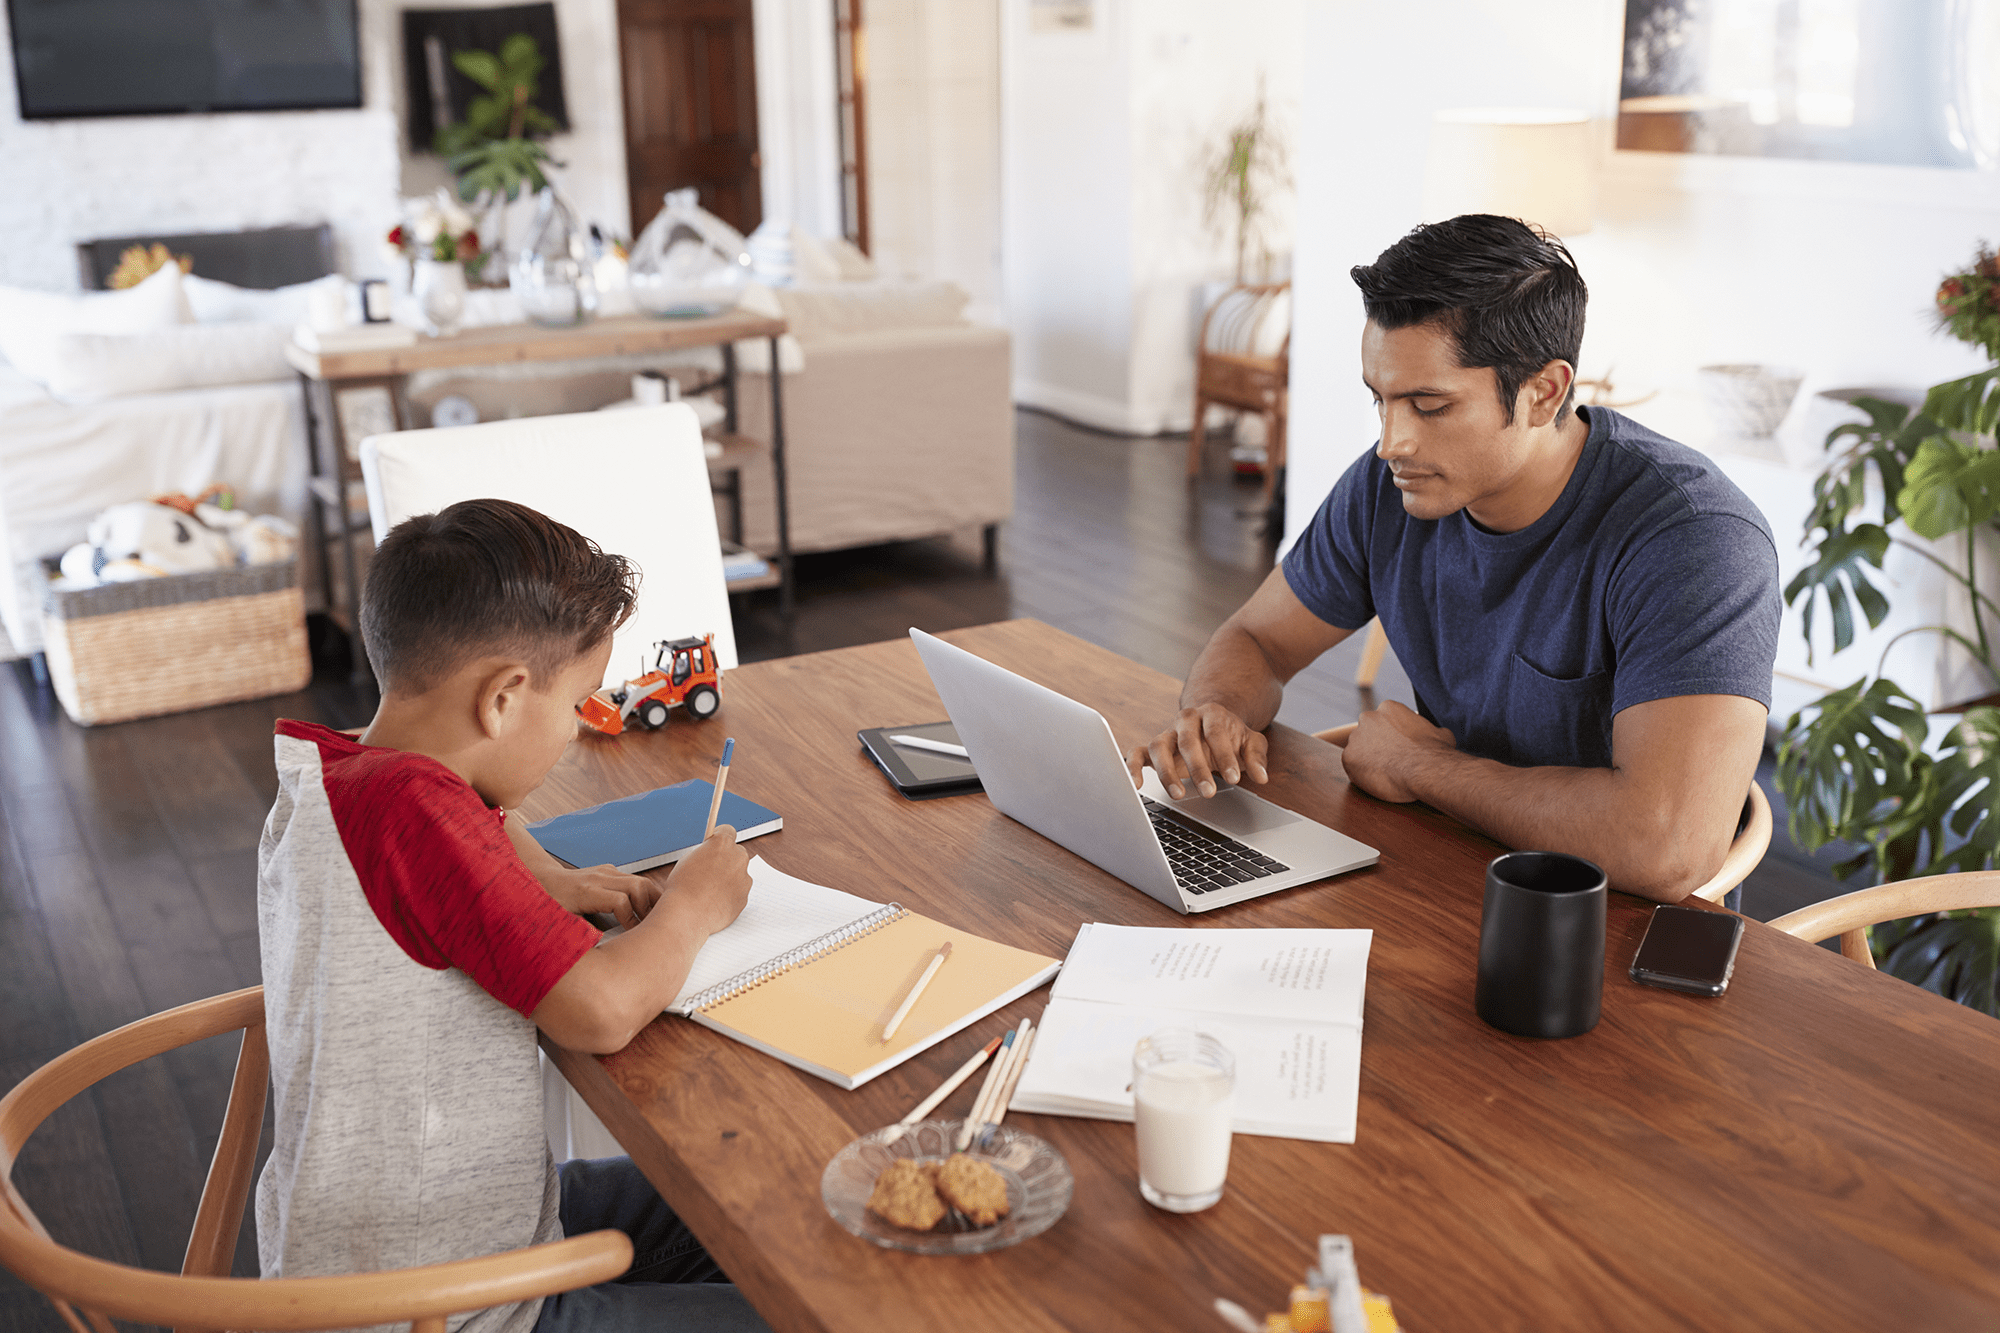 Father and son sharing a table to work and attend school remotely